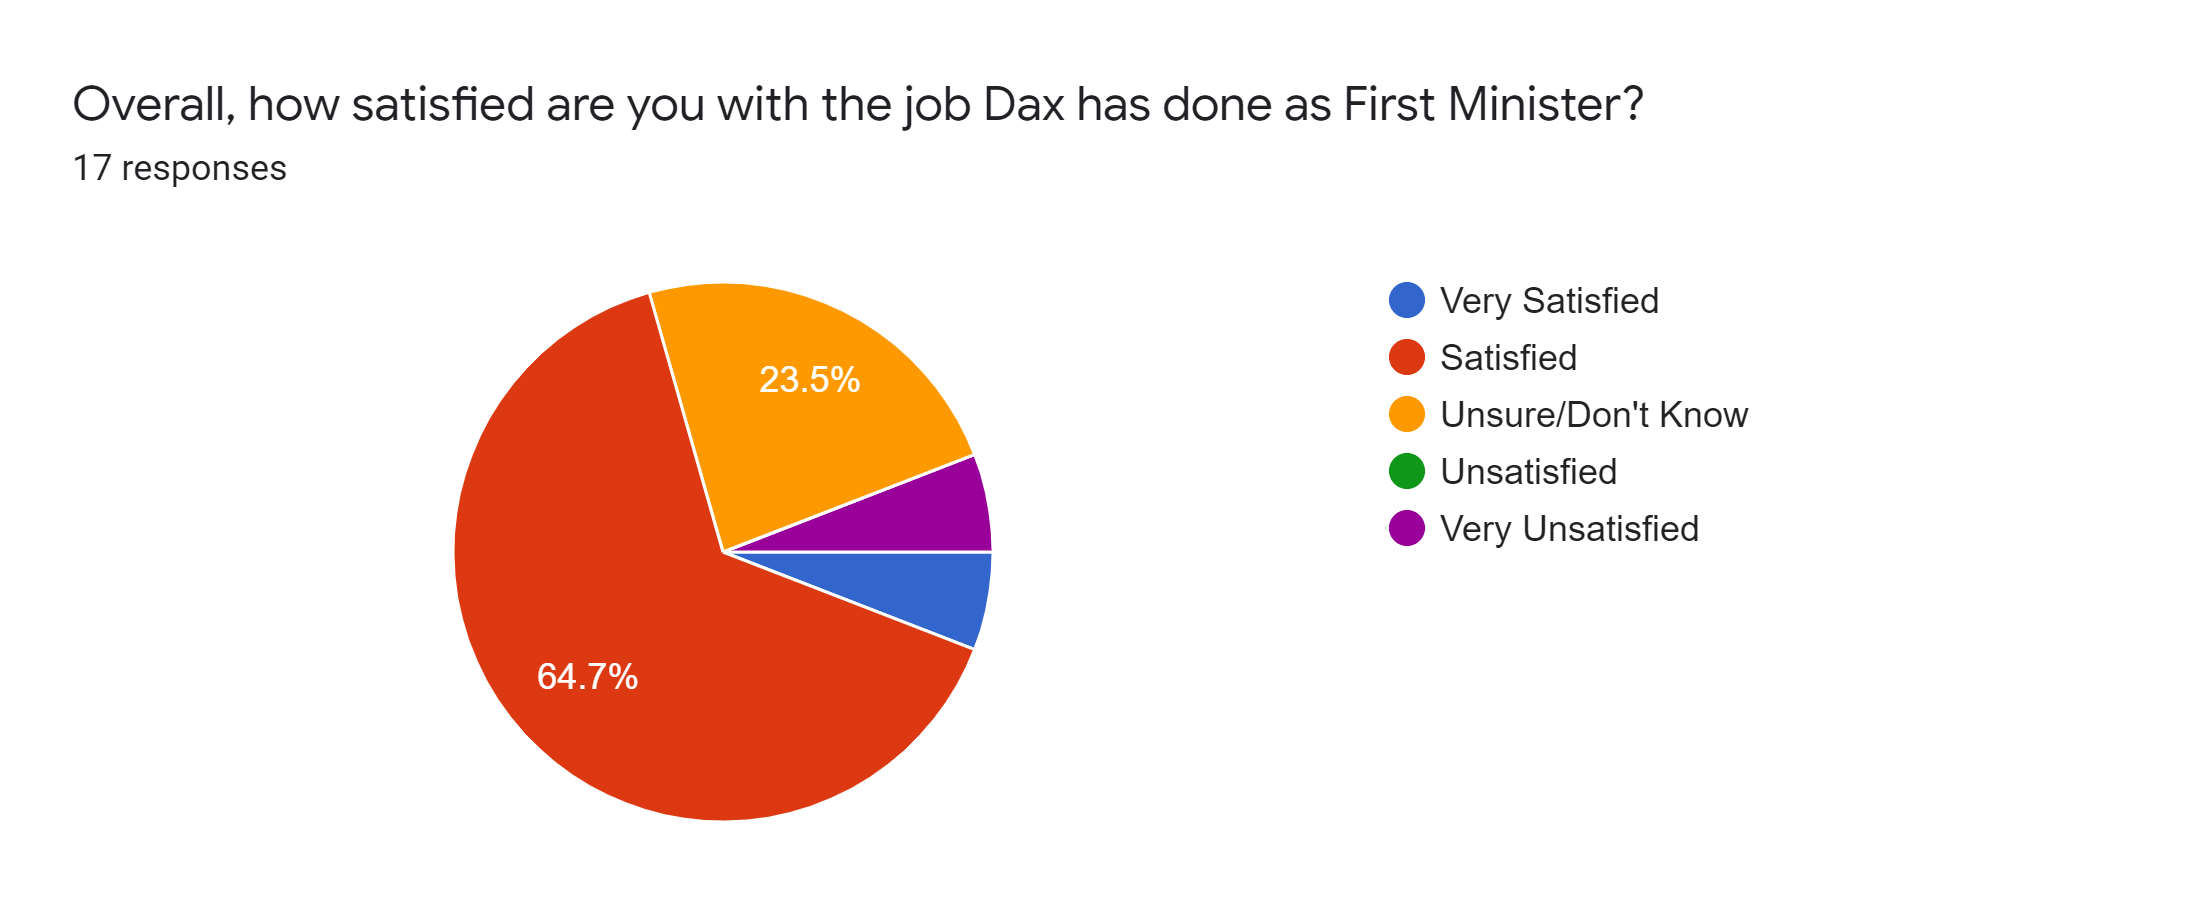 Forms response chart. Question title: Overall, how satisfied are you with the job Dax has done as First Minister?. Number of responses: 17 responses.